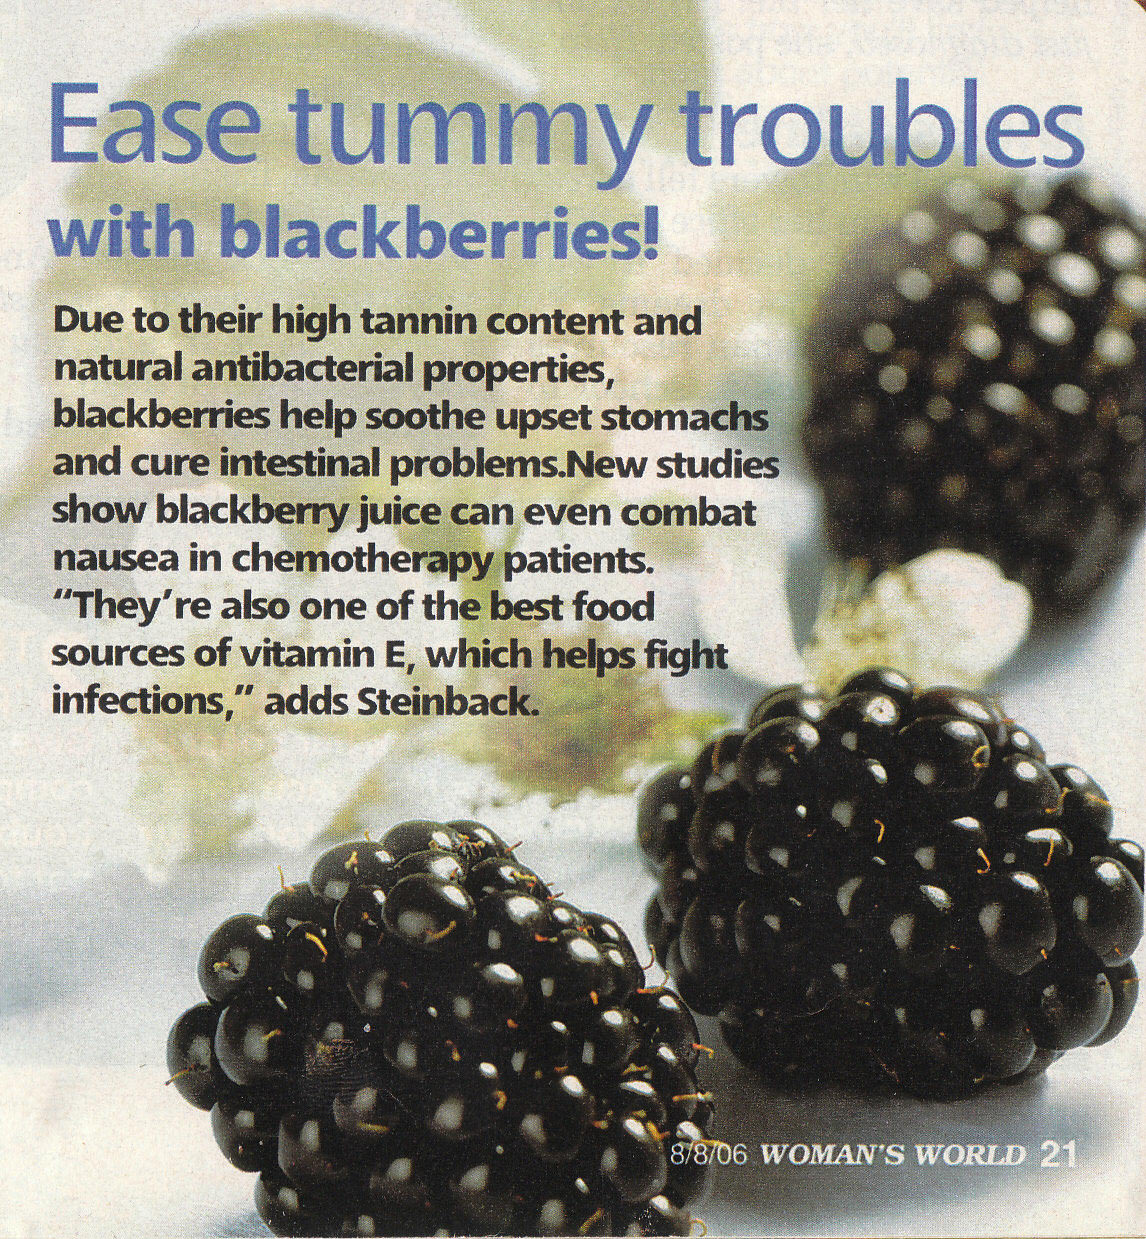 Fitness Stuff #211: Ease Tummy Troubles With Blackberries